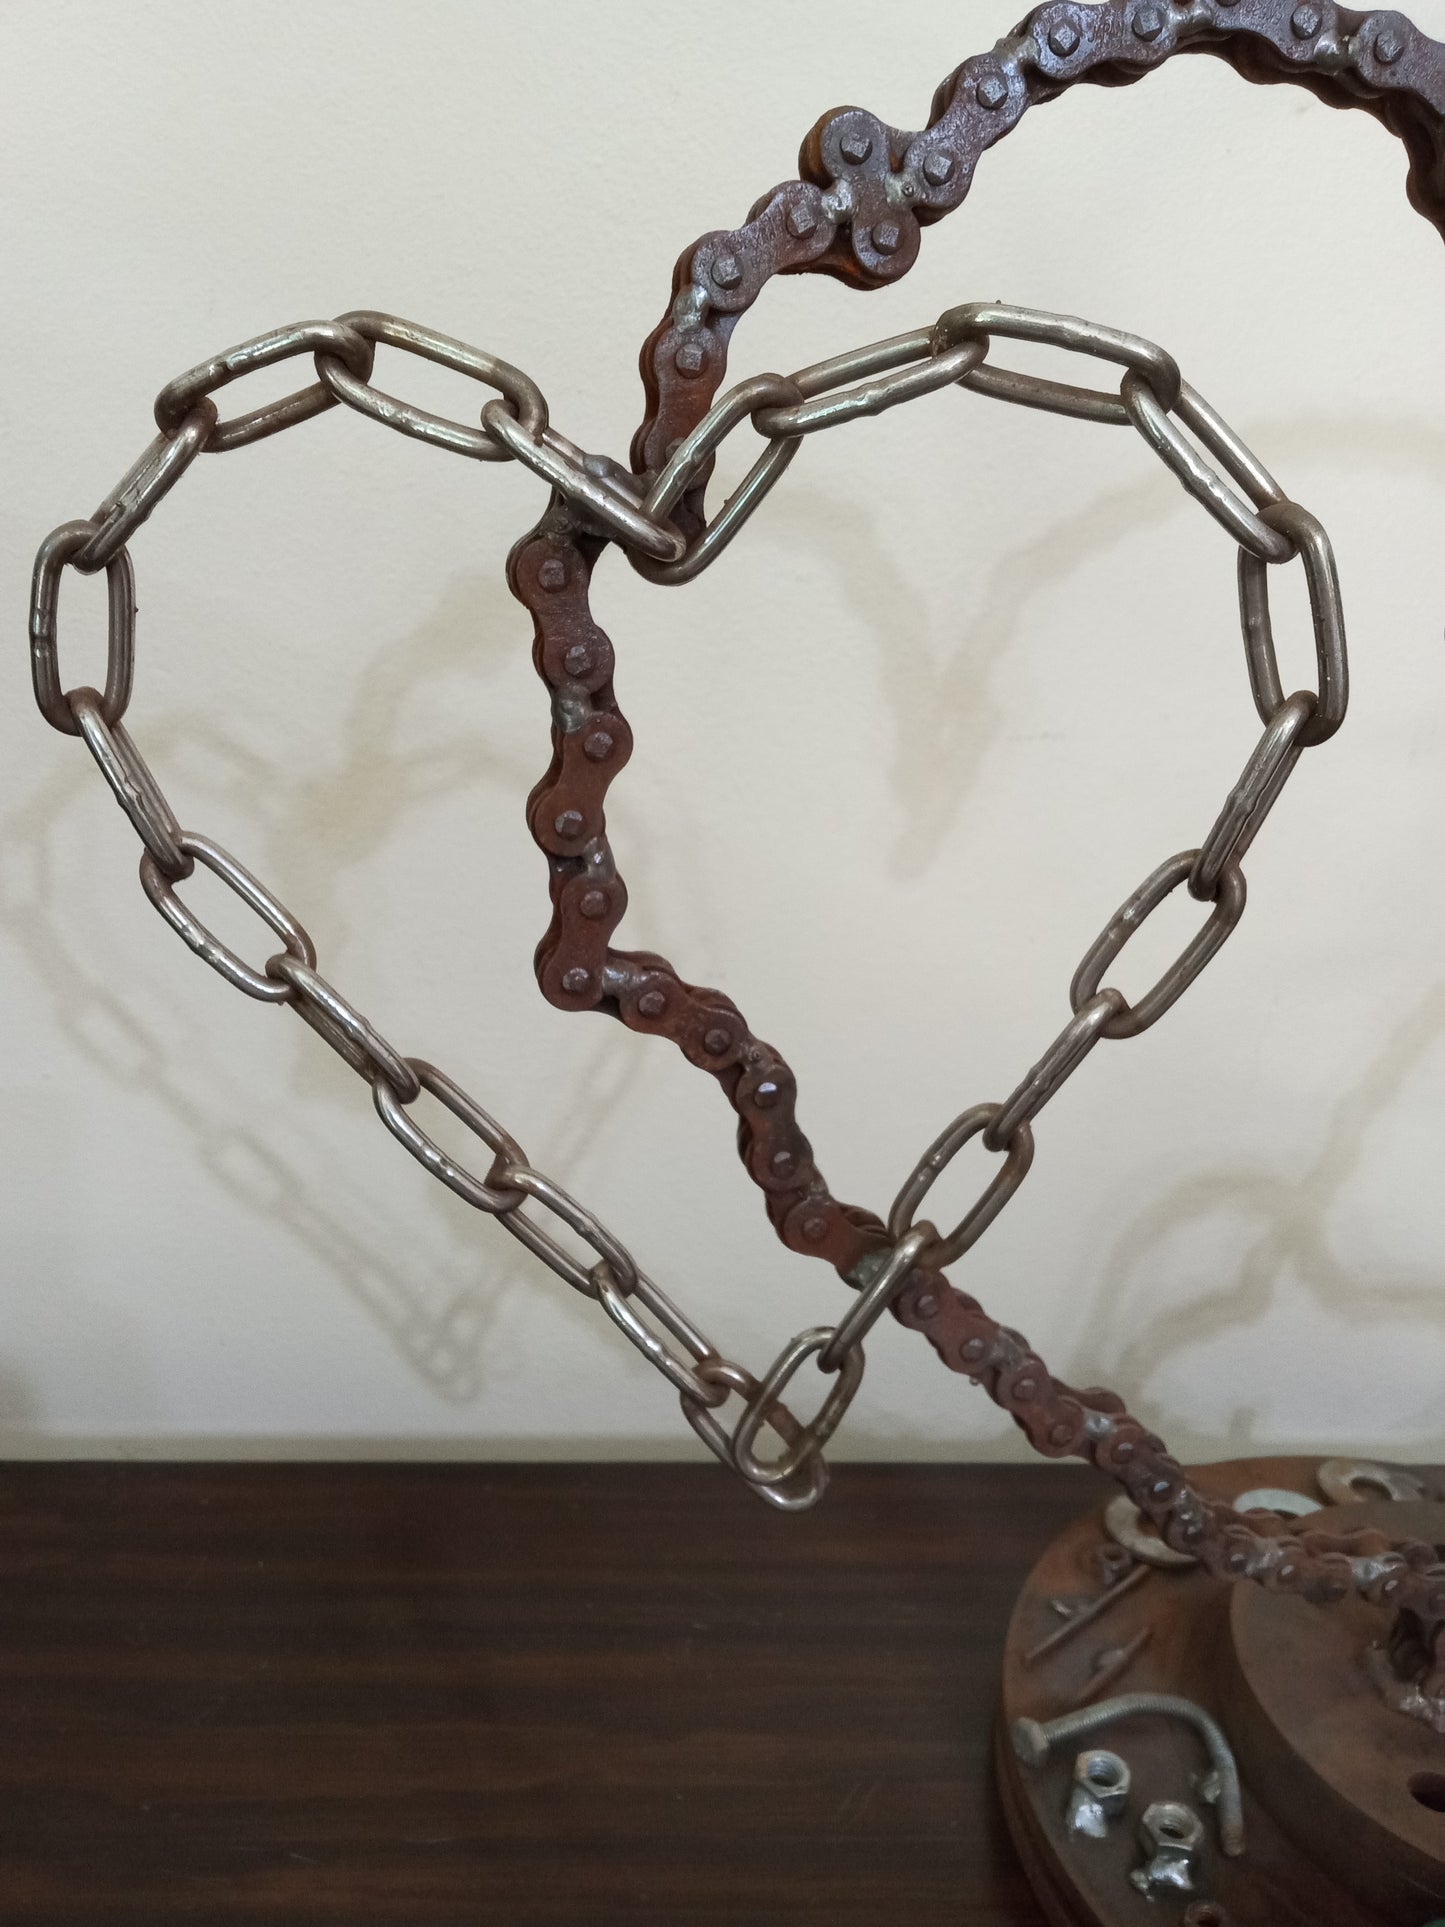 Metal Heart Sculpture of Motorcycle Chains, Rustic Up cycled Welded Metal Art